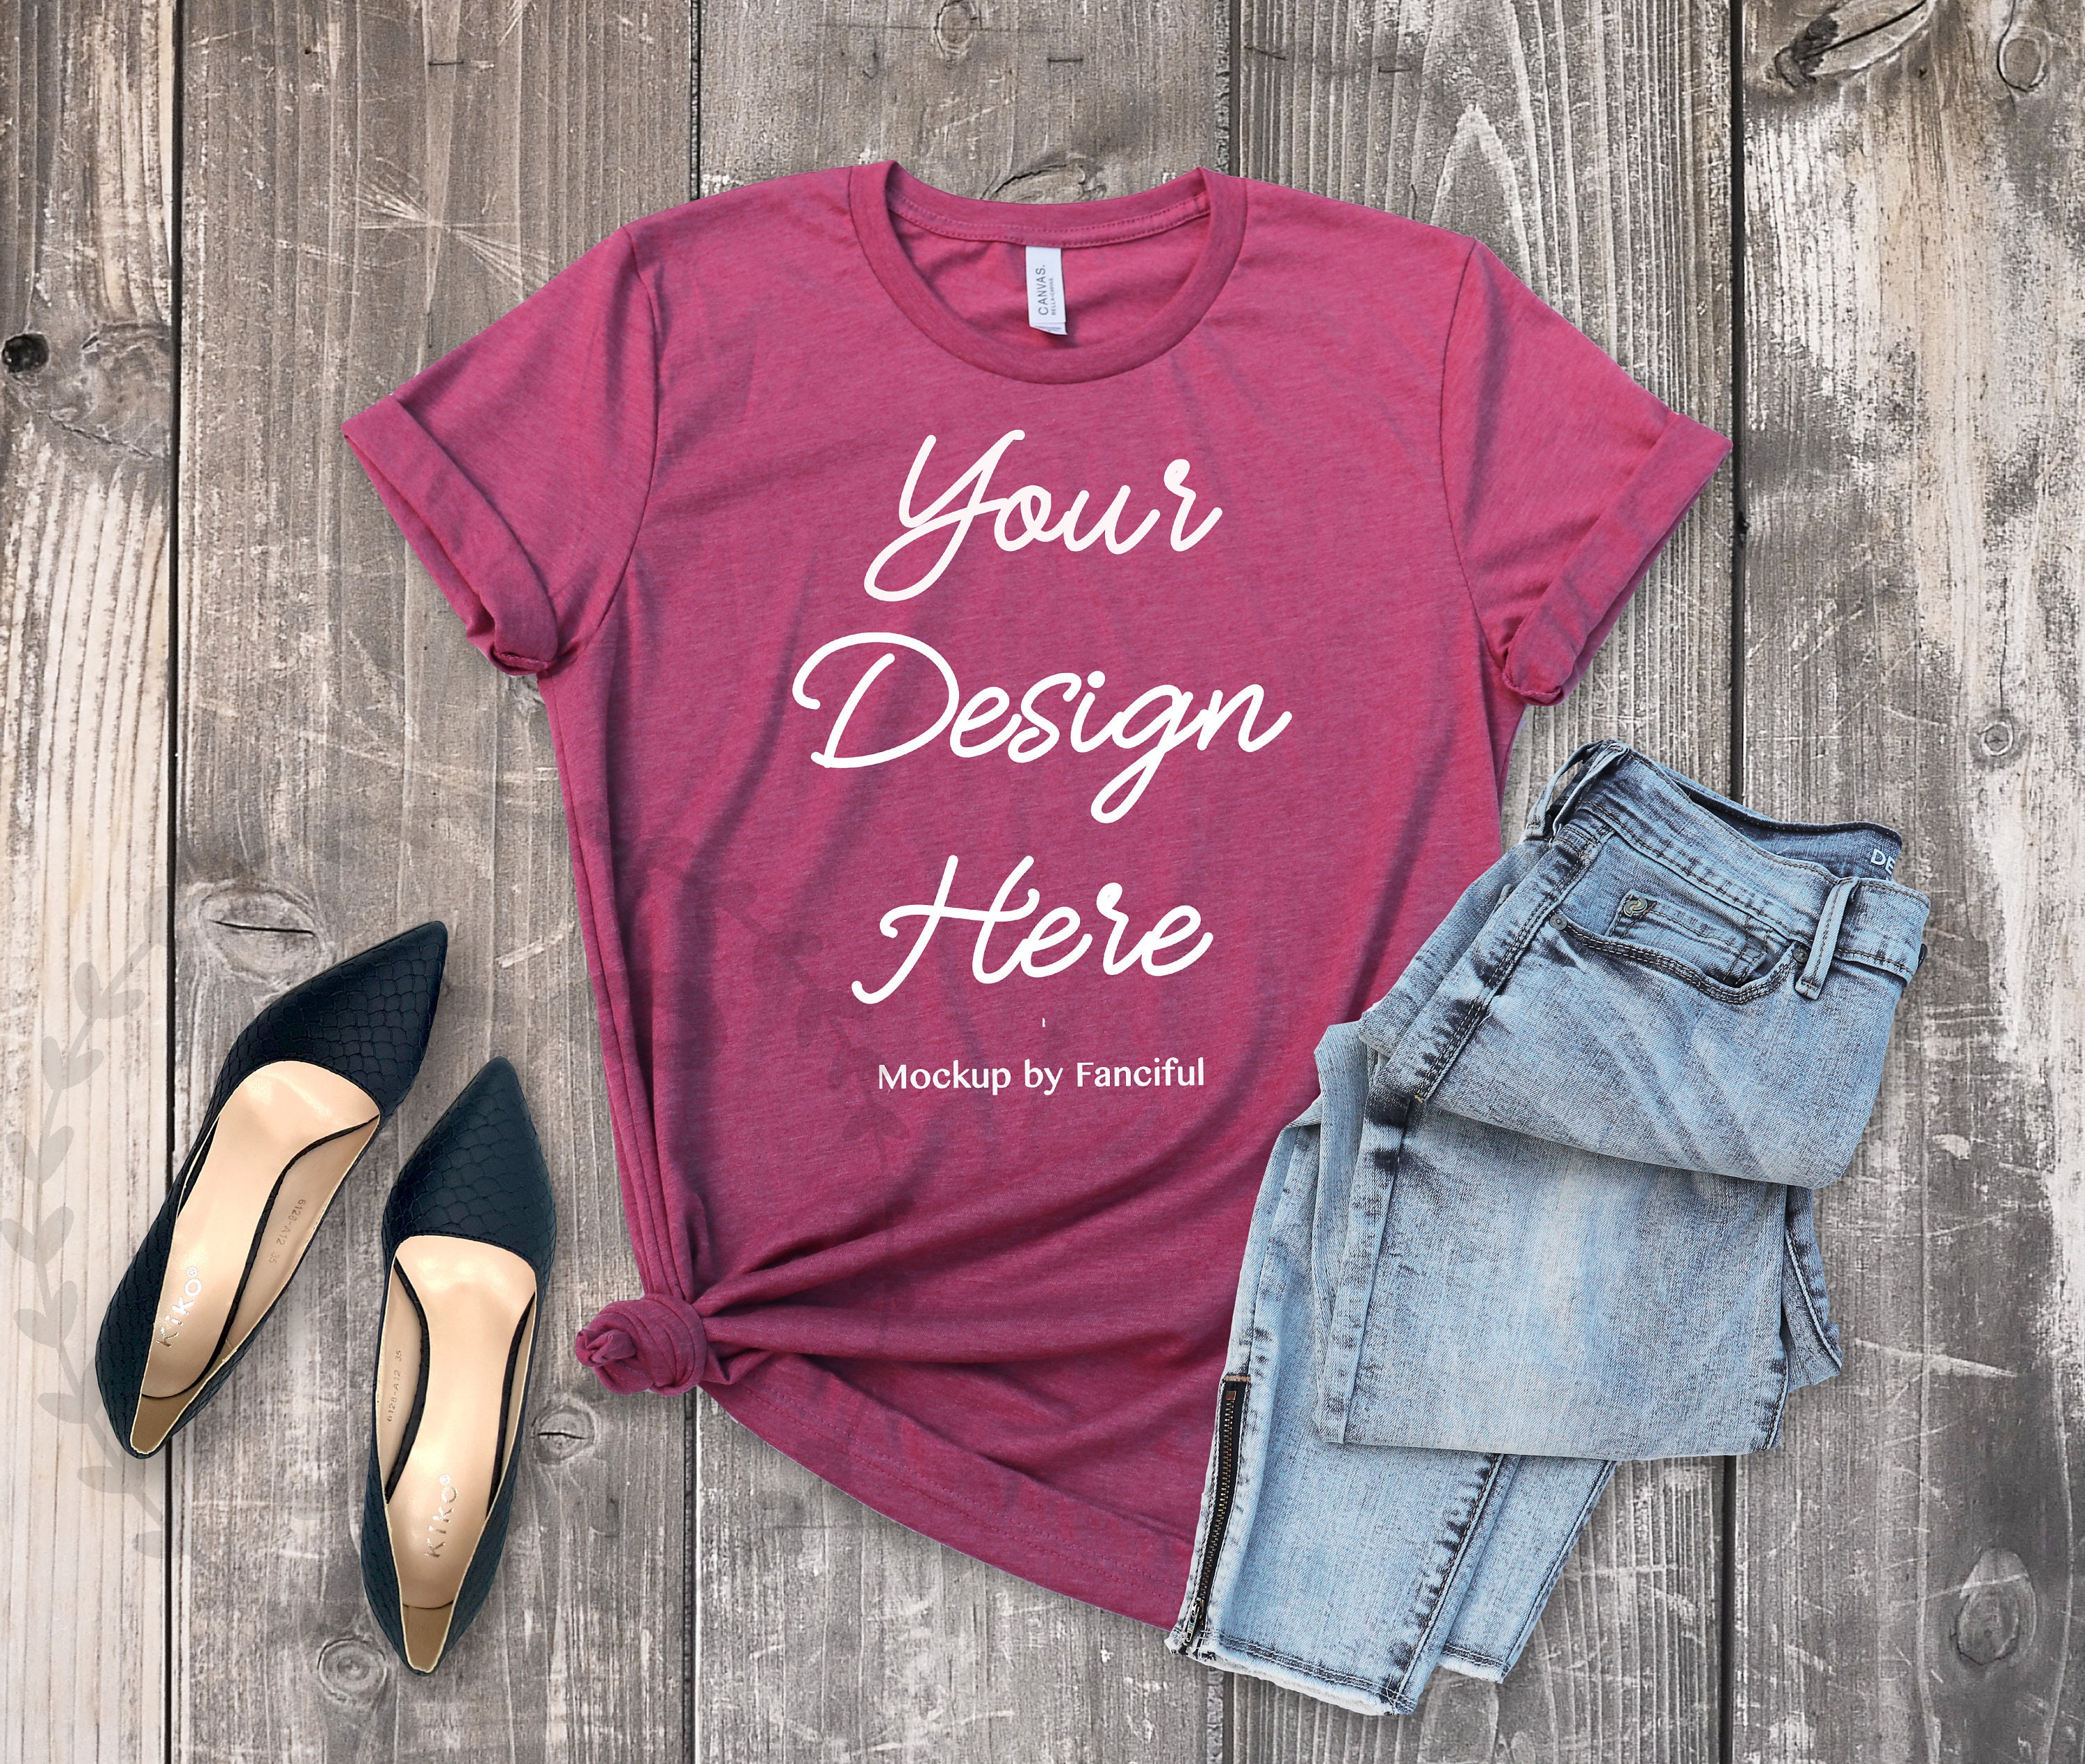 Download Unisex T Shirt Lifestyle Mock Up Wood Background Jeans Flat Lay Tee Shirt Styled Mockup Bella Canvas 3001 Heather Cardinal Mockup Photography Art Collectibles Safarni Org